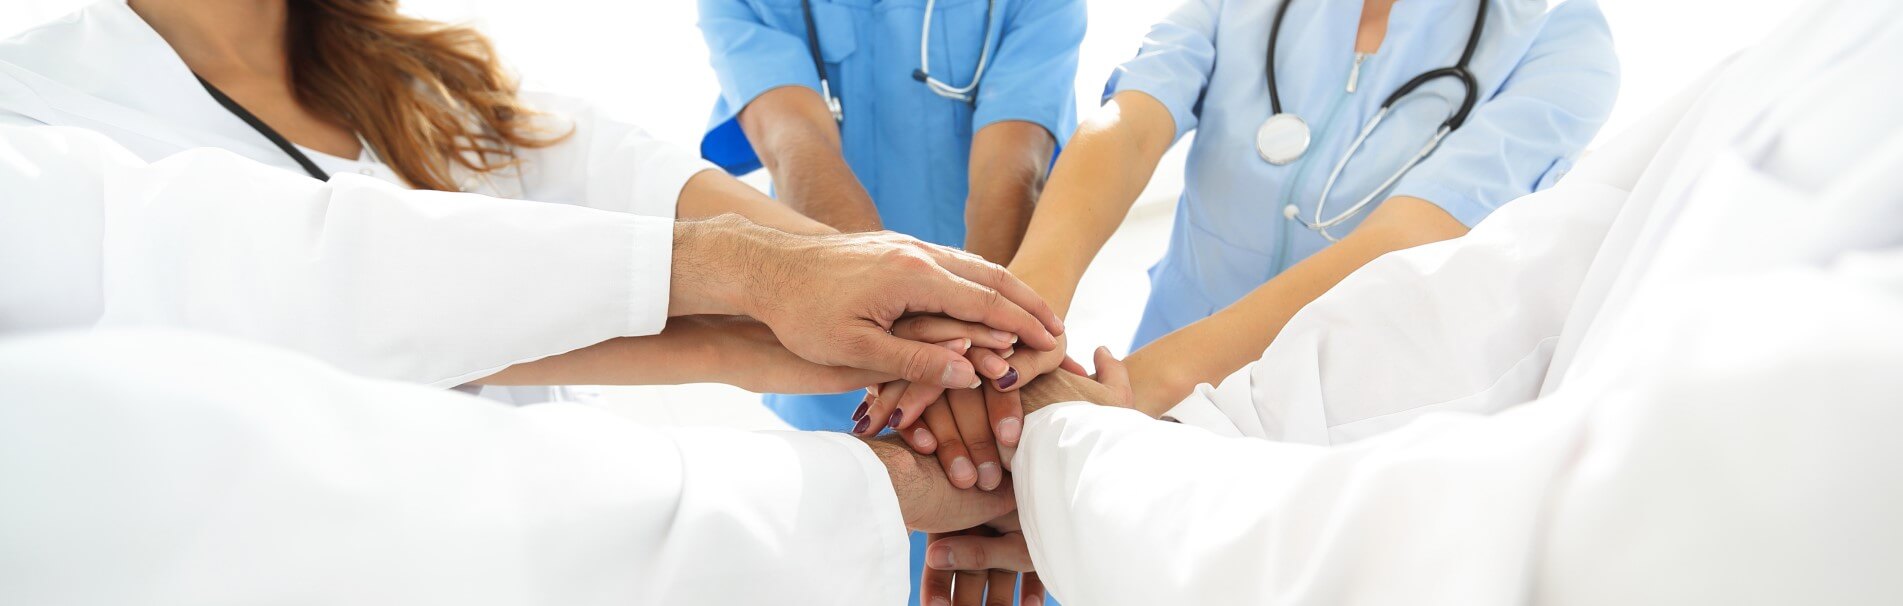 Doctors Putting Their Hands In In A Huddle